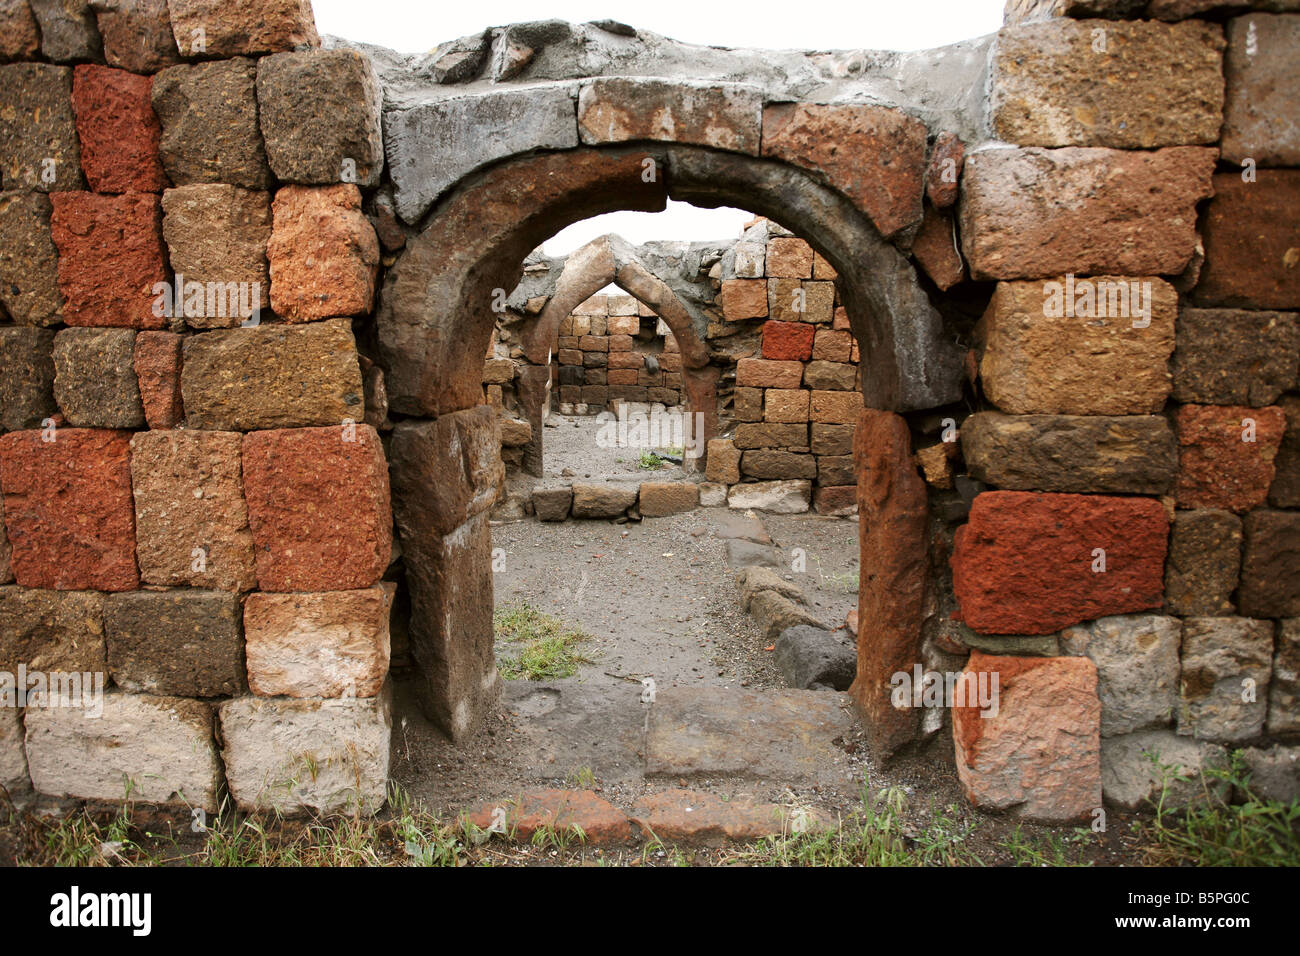 Doorways in Ani, the old city now abandoned, near the border with Armenia Stock Photo